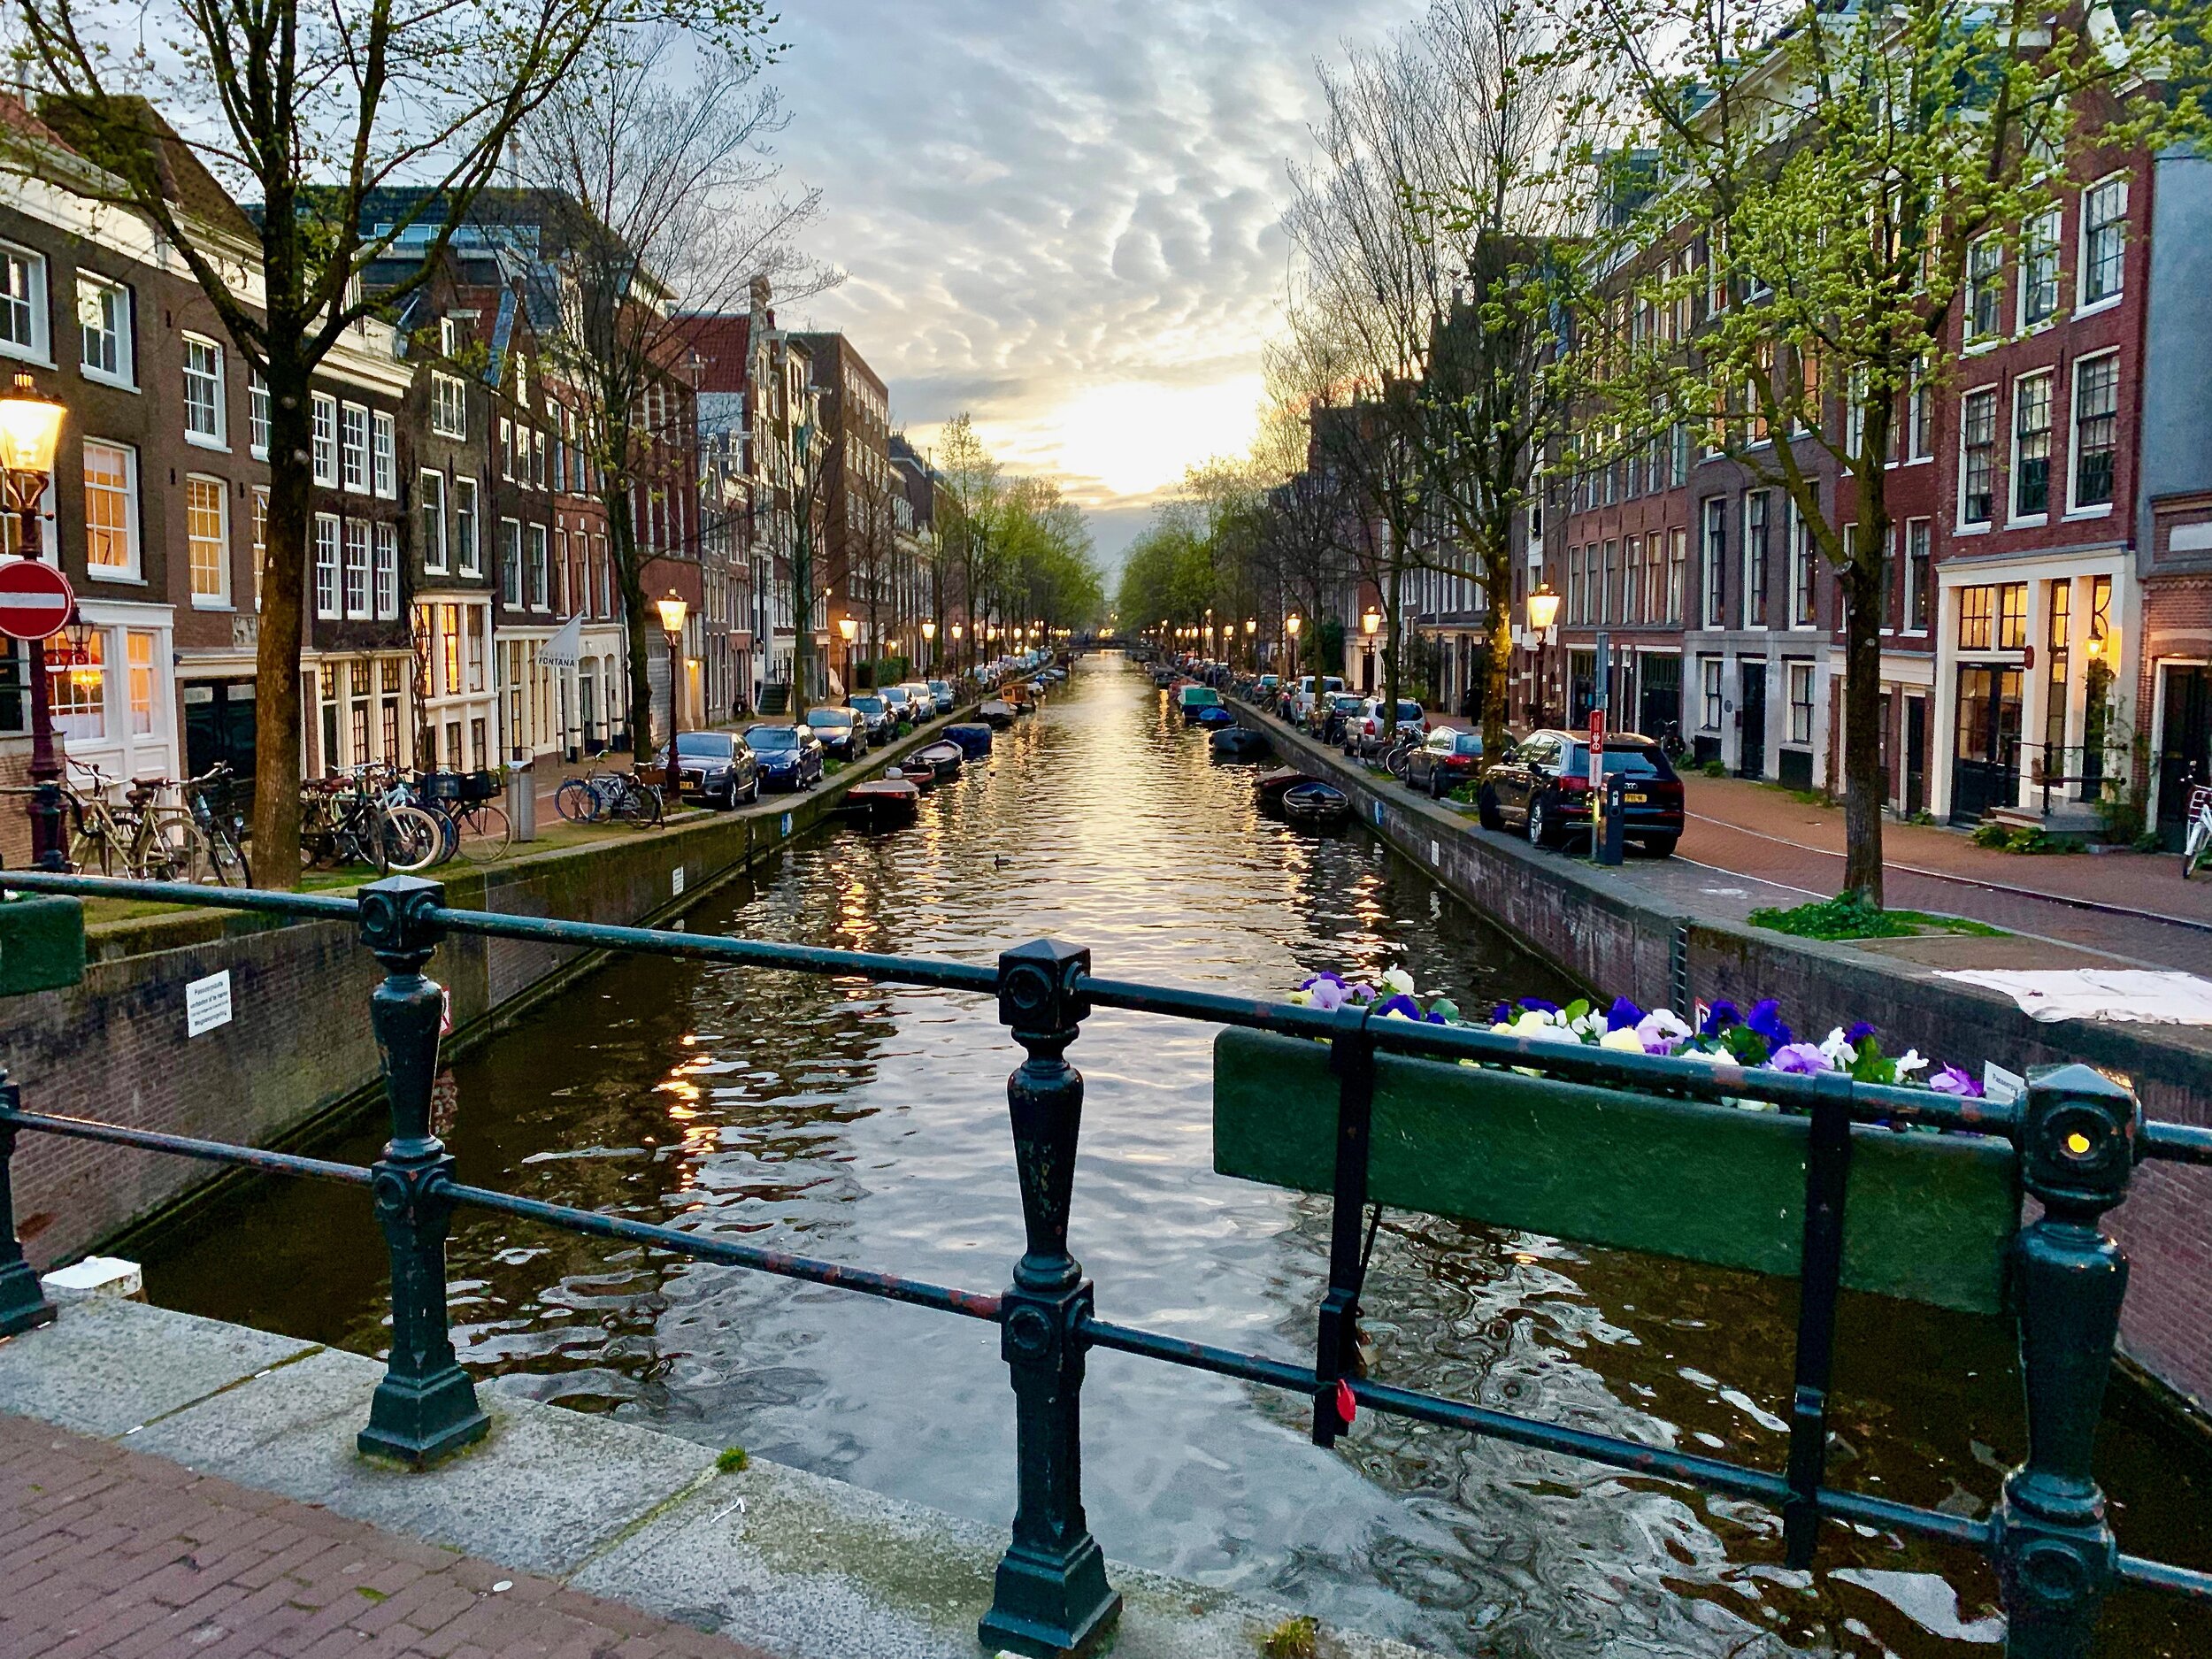 The idyllic canals of Amsterdam